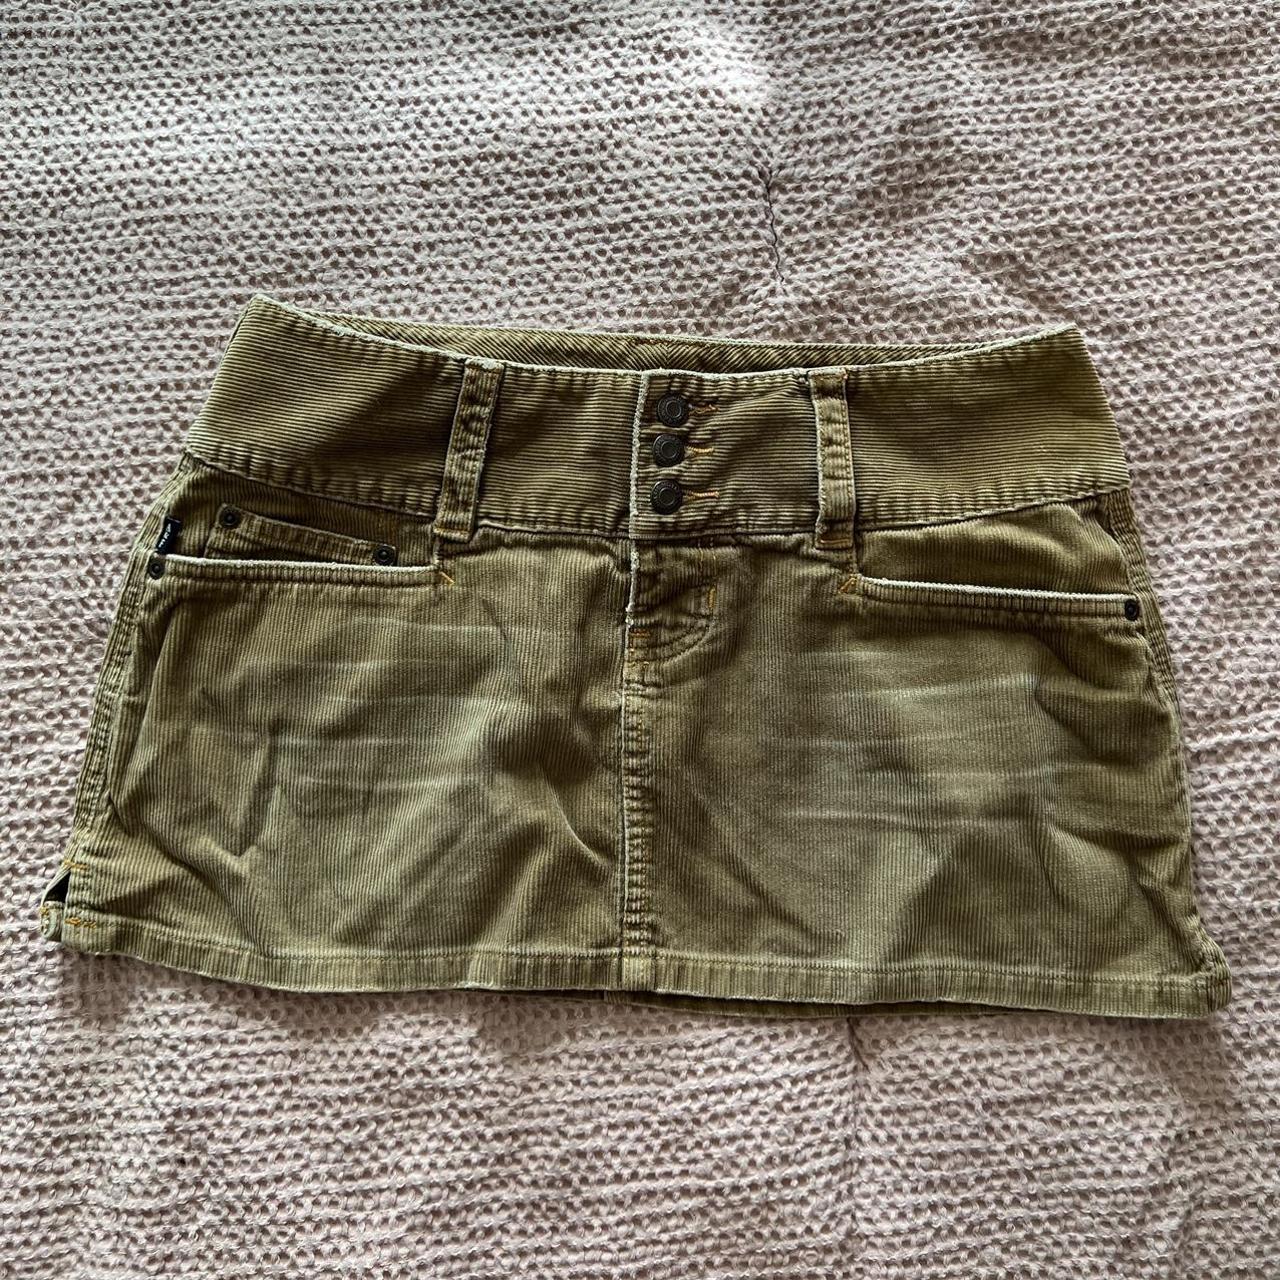 Abercrombie & Fitch Women's Cream and Tan Skirt | Depop